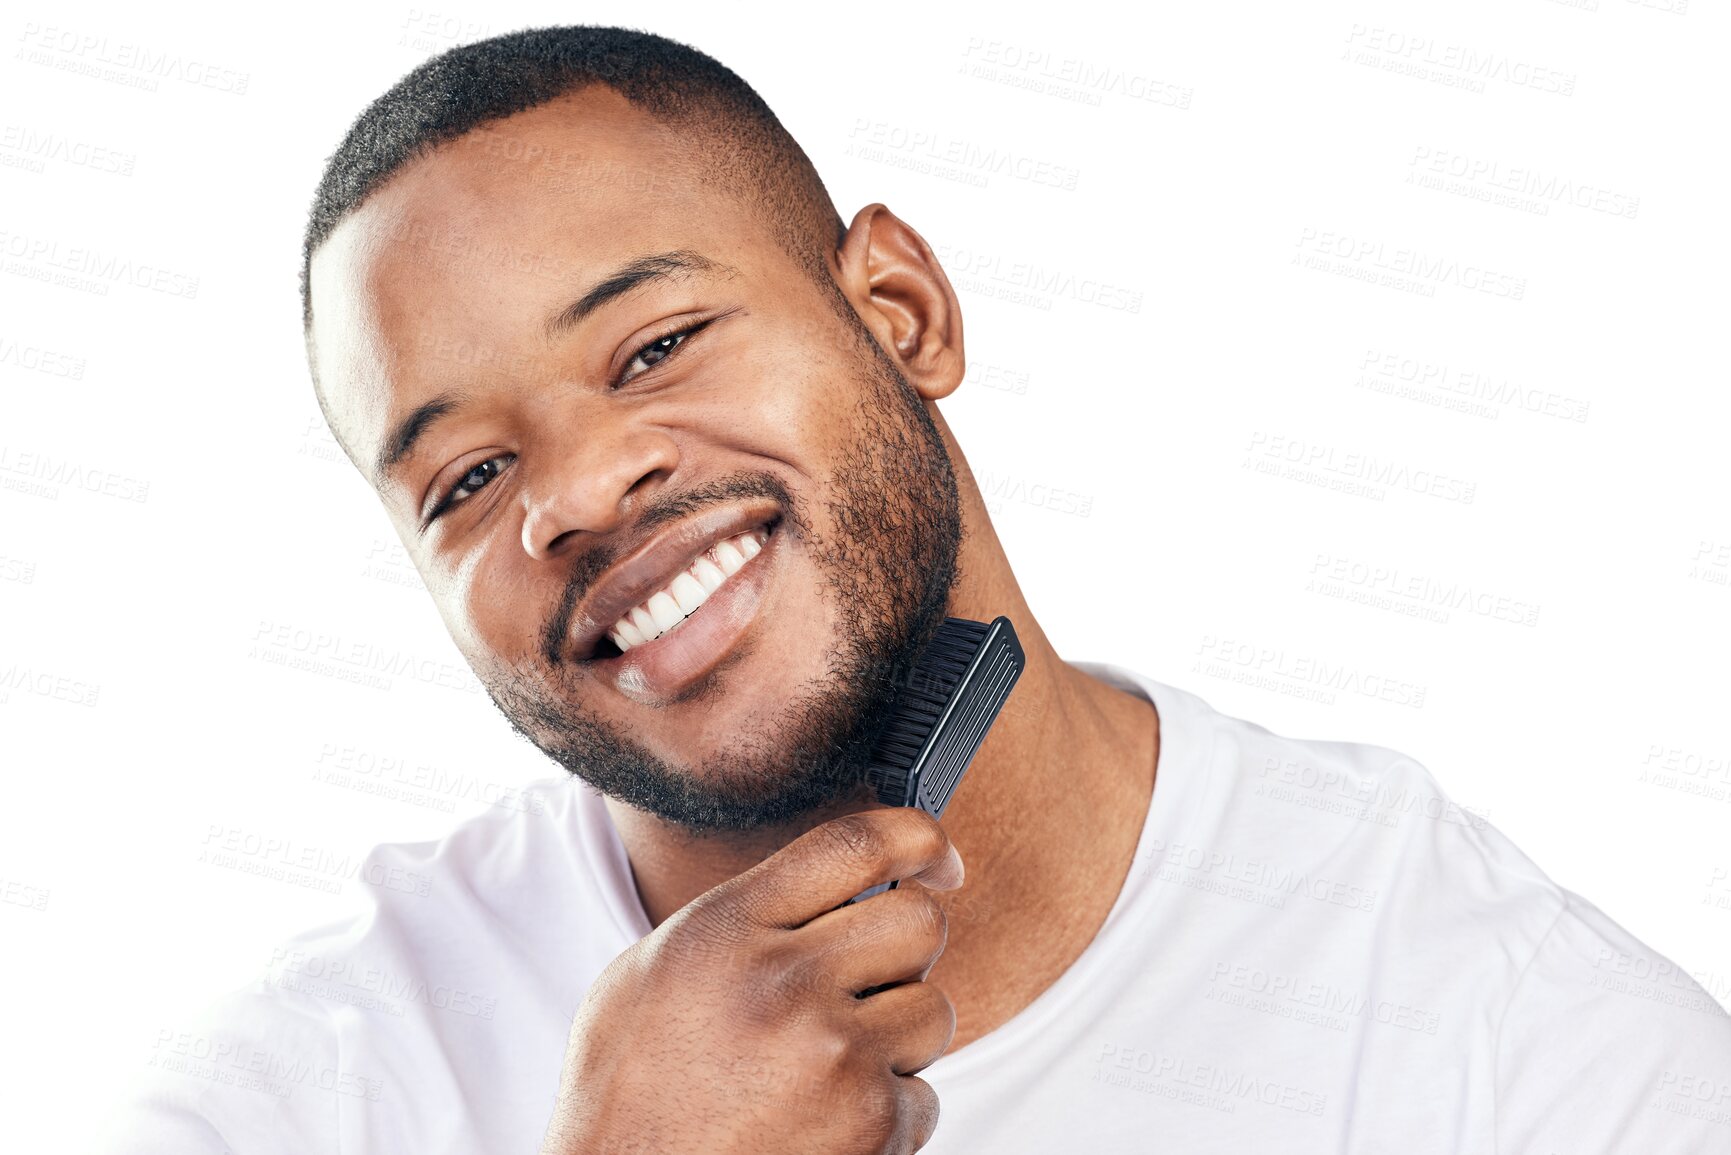 Buy stock photo Portrait, happy or black man brushing beard or grooming isolated on transparent png background. Natural clean face, facial hair care maintenance or handsome person smiling with self love or wellness